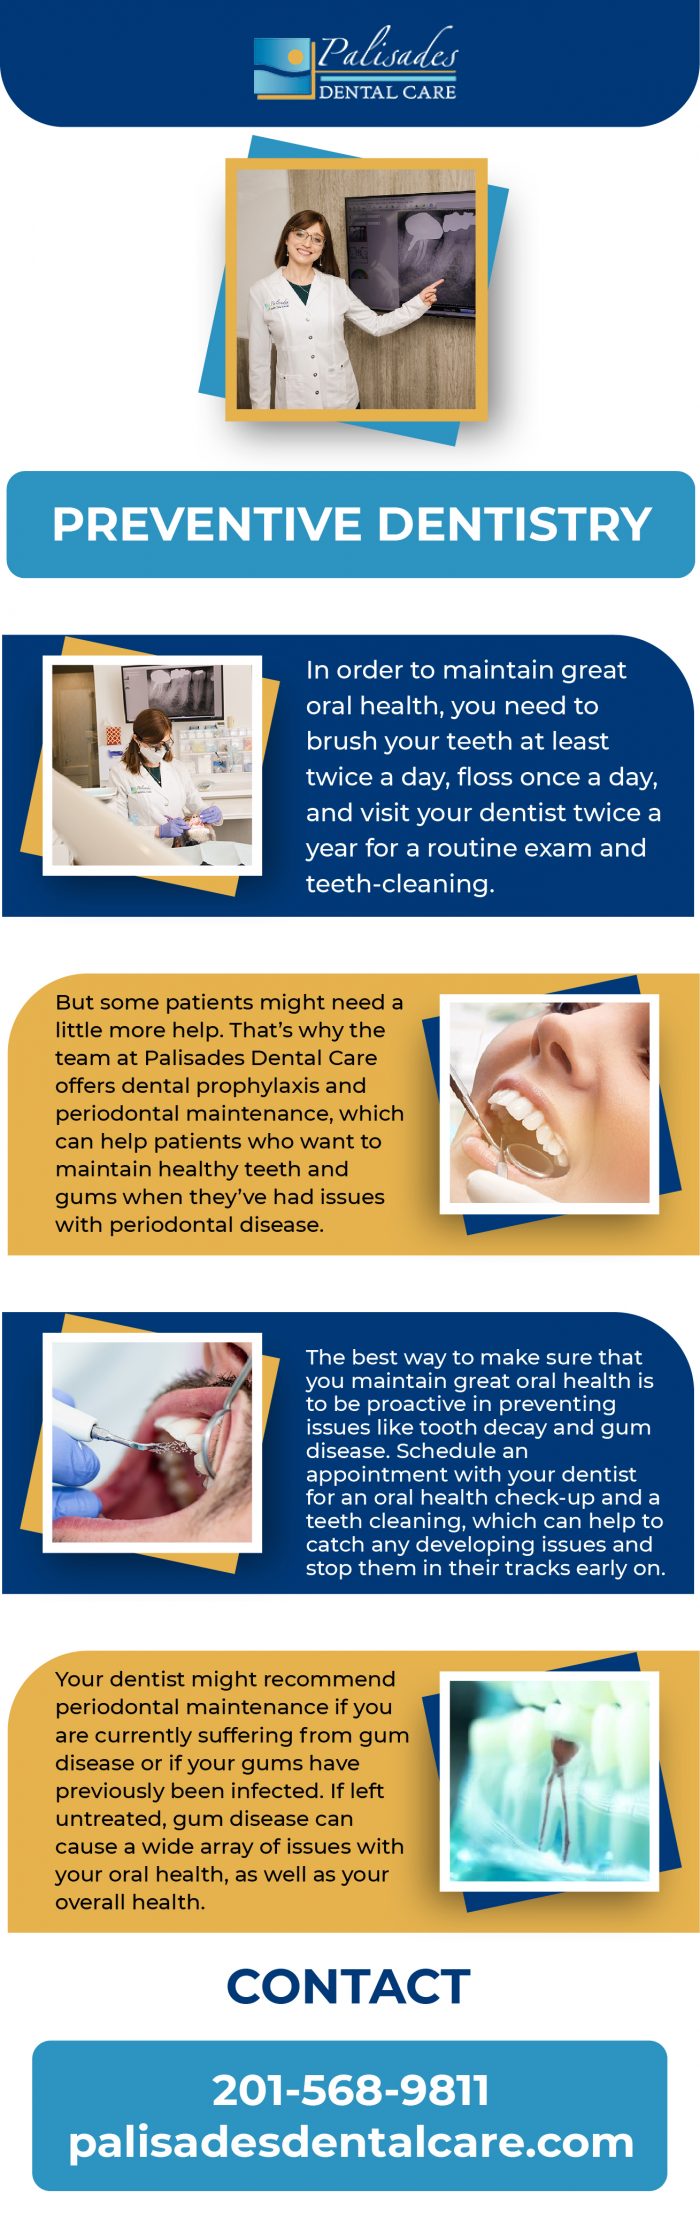 In New Jersey, excellent preventive dentistry is available – Palisades Dental Care